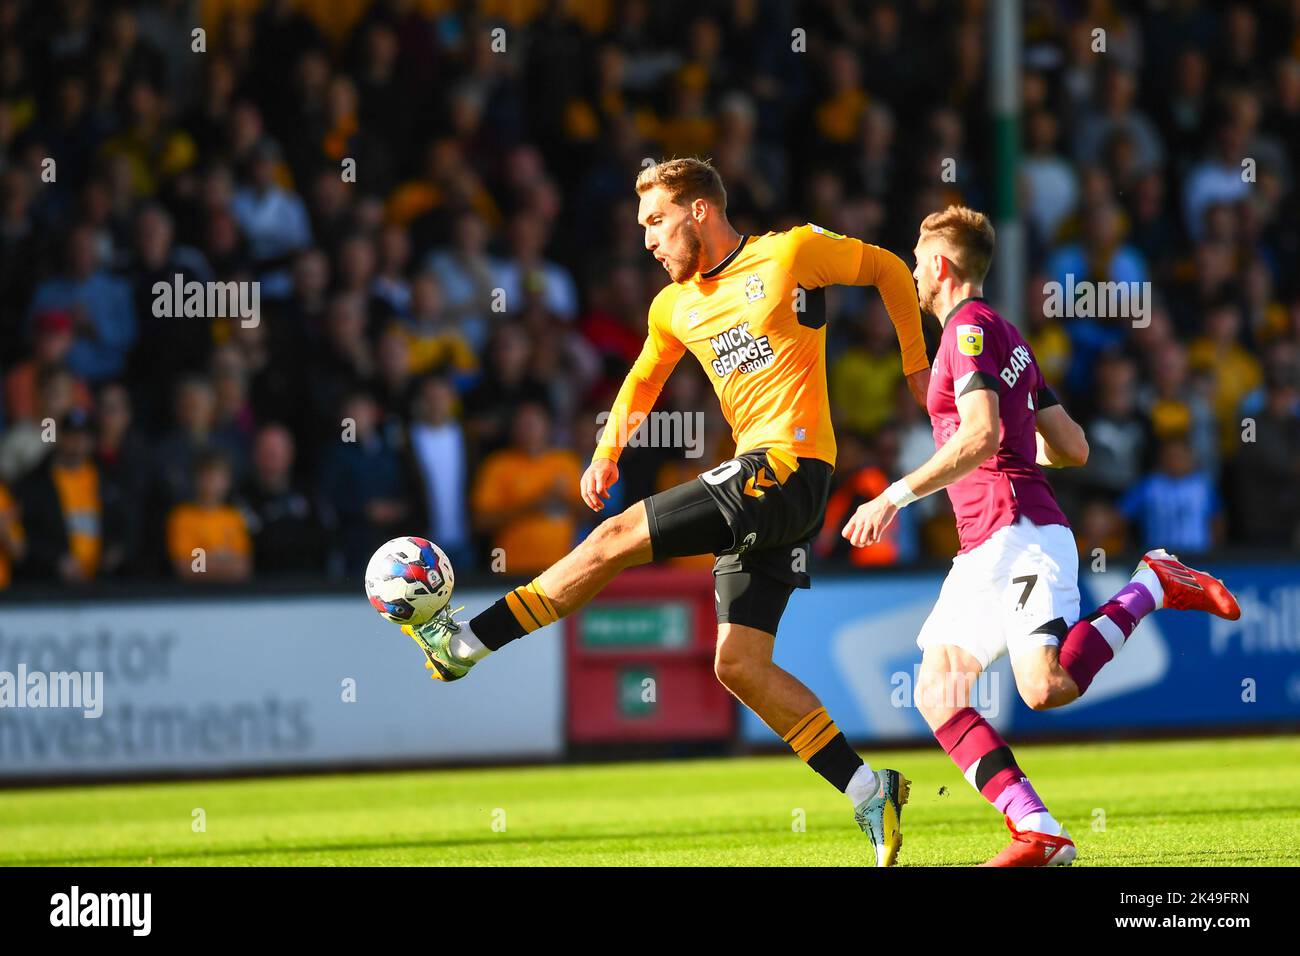 Cambridge, UK. 1st October 2022Tom Barkhuizen (7 Derby) challenges Sam Smith (10 Cambridge United) during the Sky Bet League 1 match between Cambridge United and Derby County at the R Costings Abbey Stadium, Cambridge on Saturday 1st October 2022. (Credit: Kevin Hodgson | MI News) Credit: MI News & Sport /Alamy Live News Stock Photo